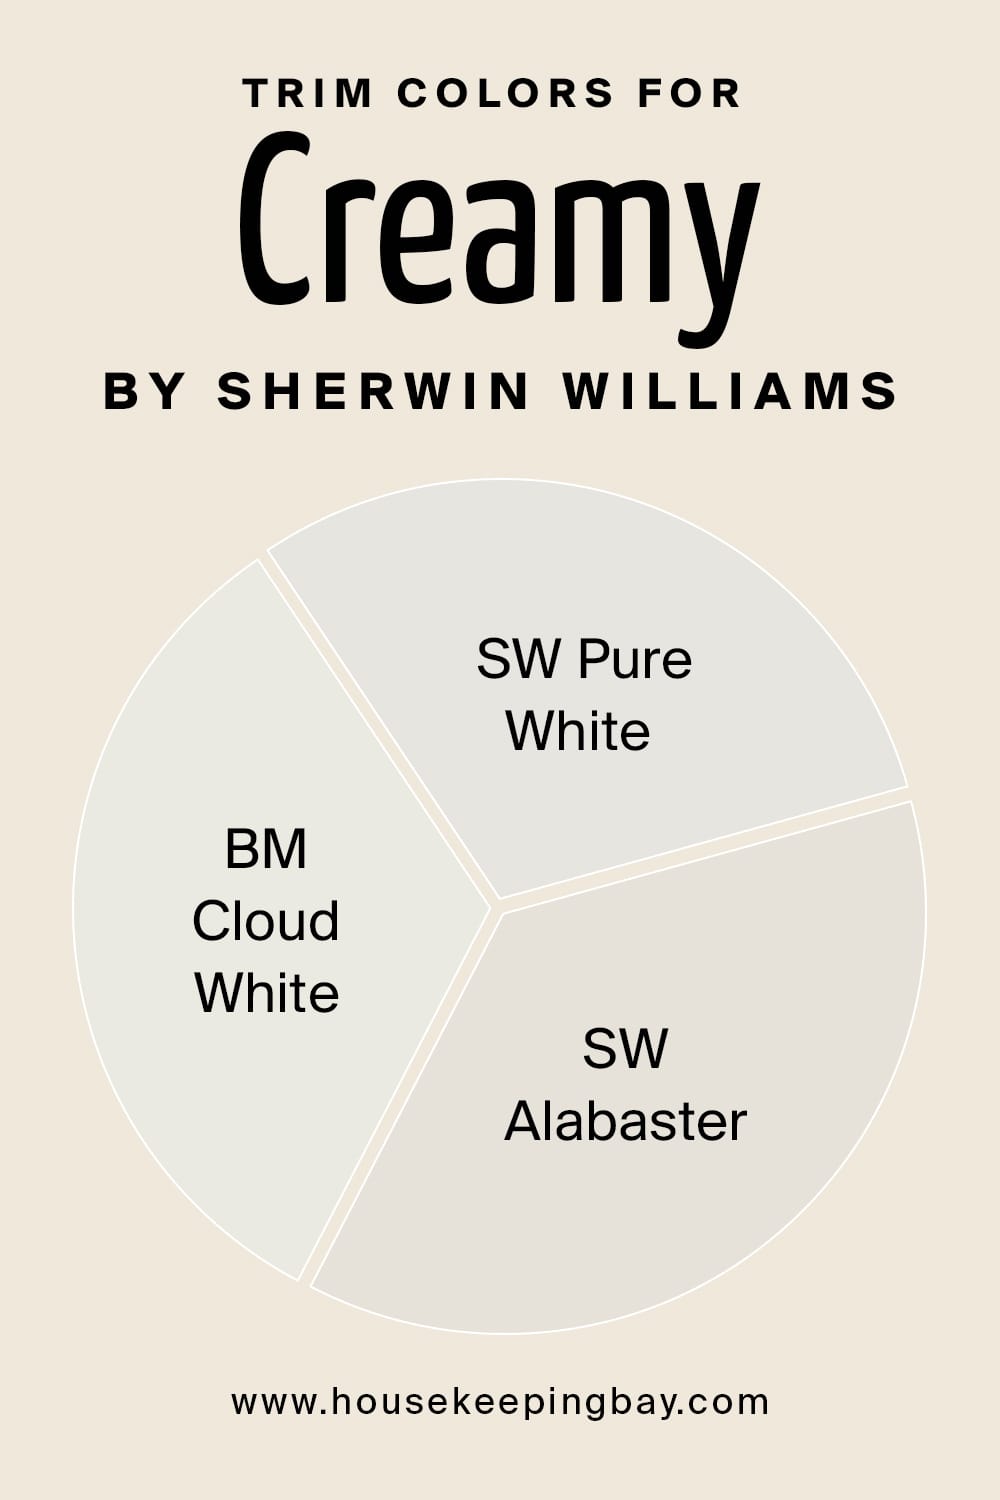 Trim Colors for Cream by Sherwin Williams